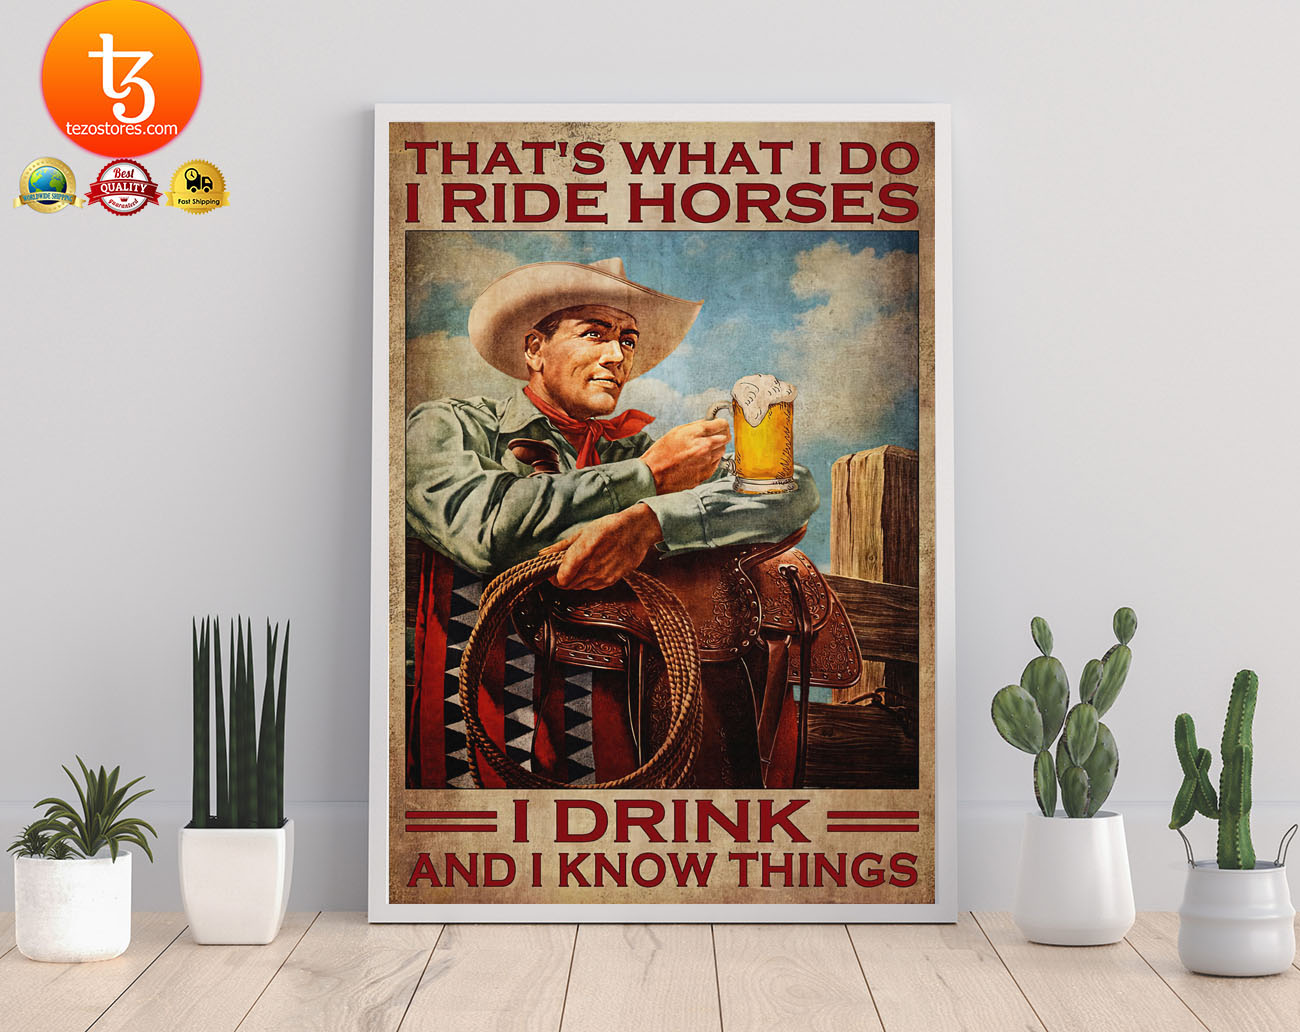 Cowboy Thats what I do I ride horses I drink and I know things poster2